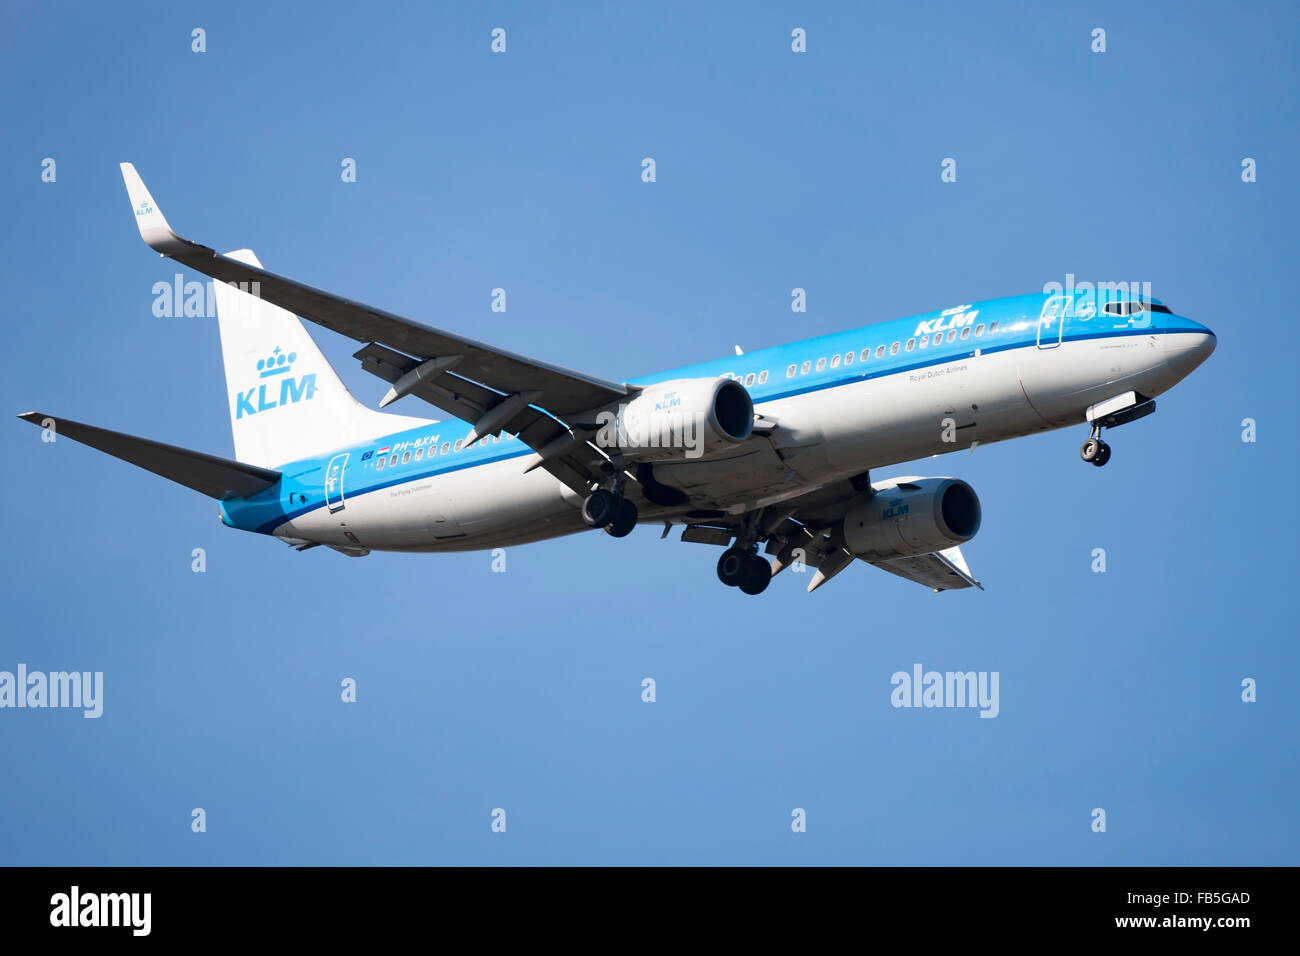 KLM Airliner Stock Photo